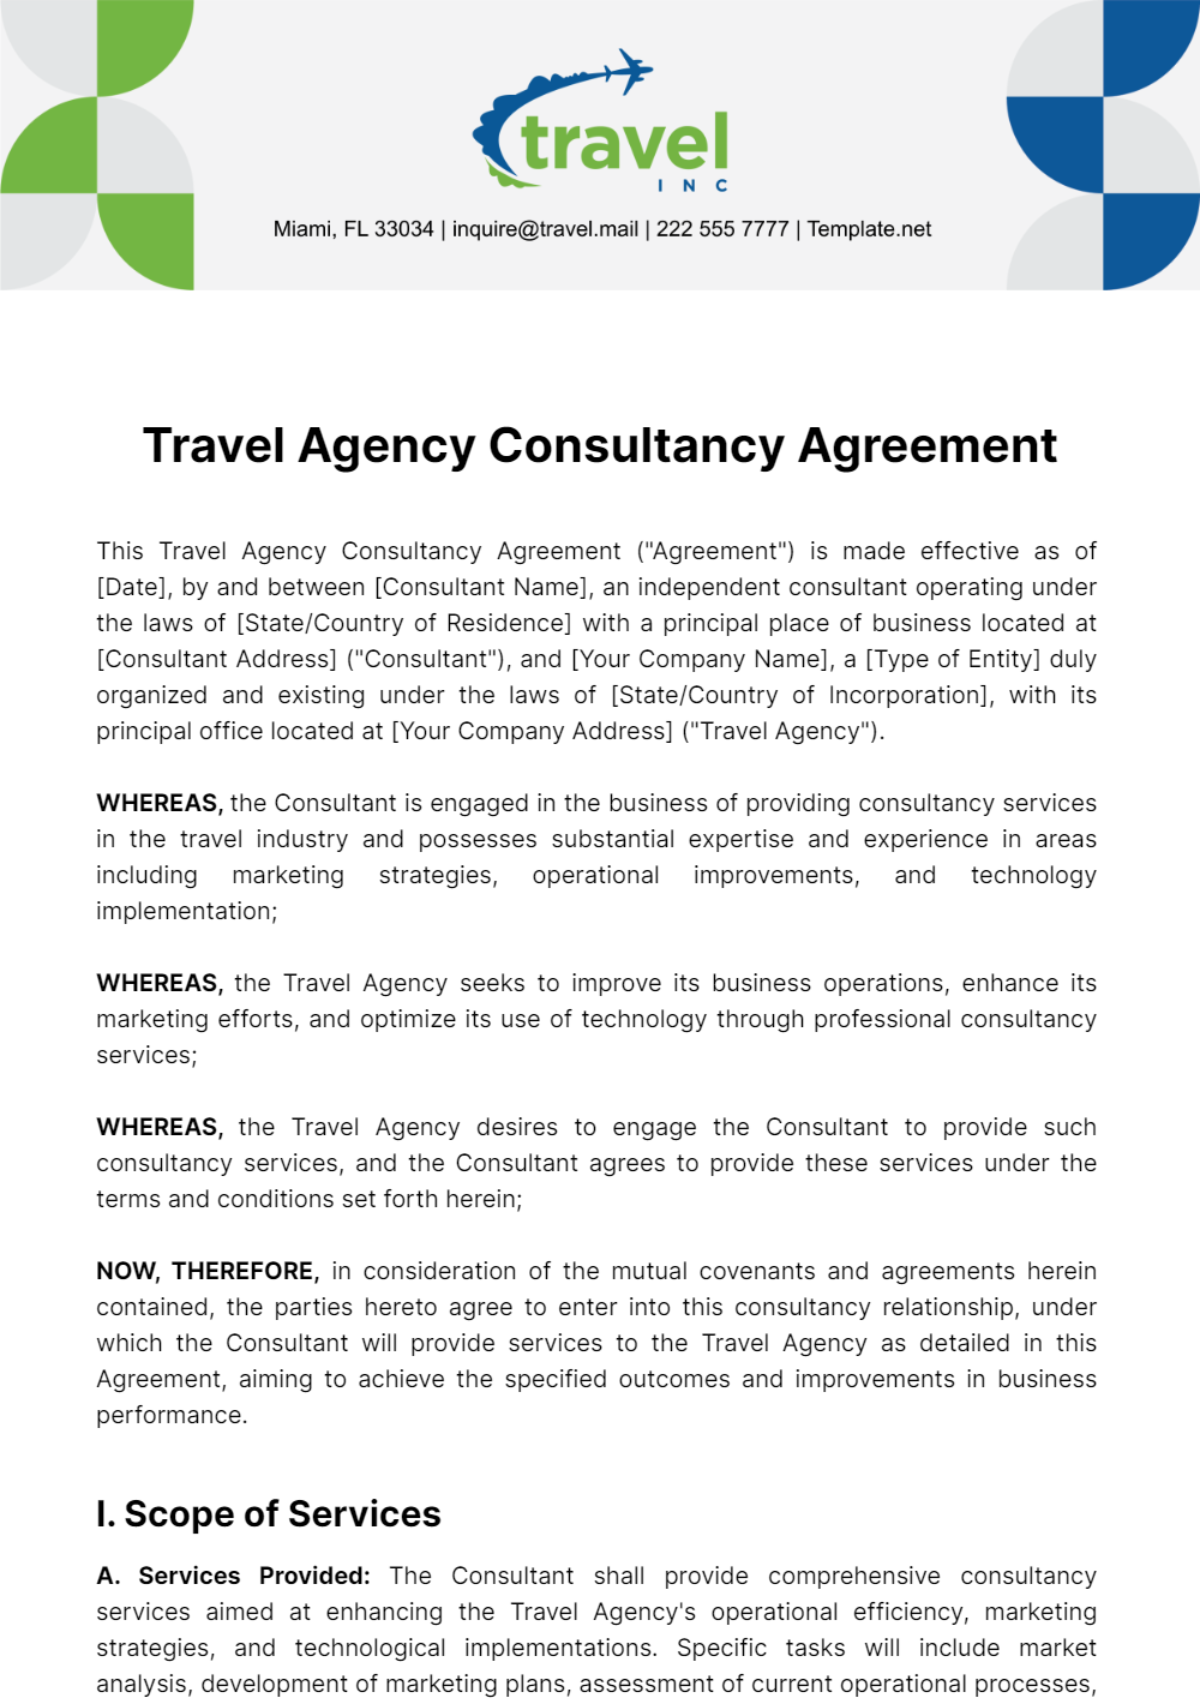 Free Travel Agency Consultancy Agreement Template